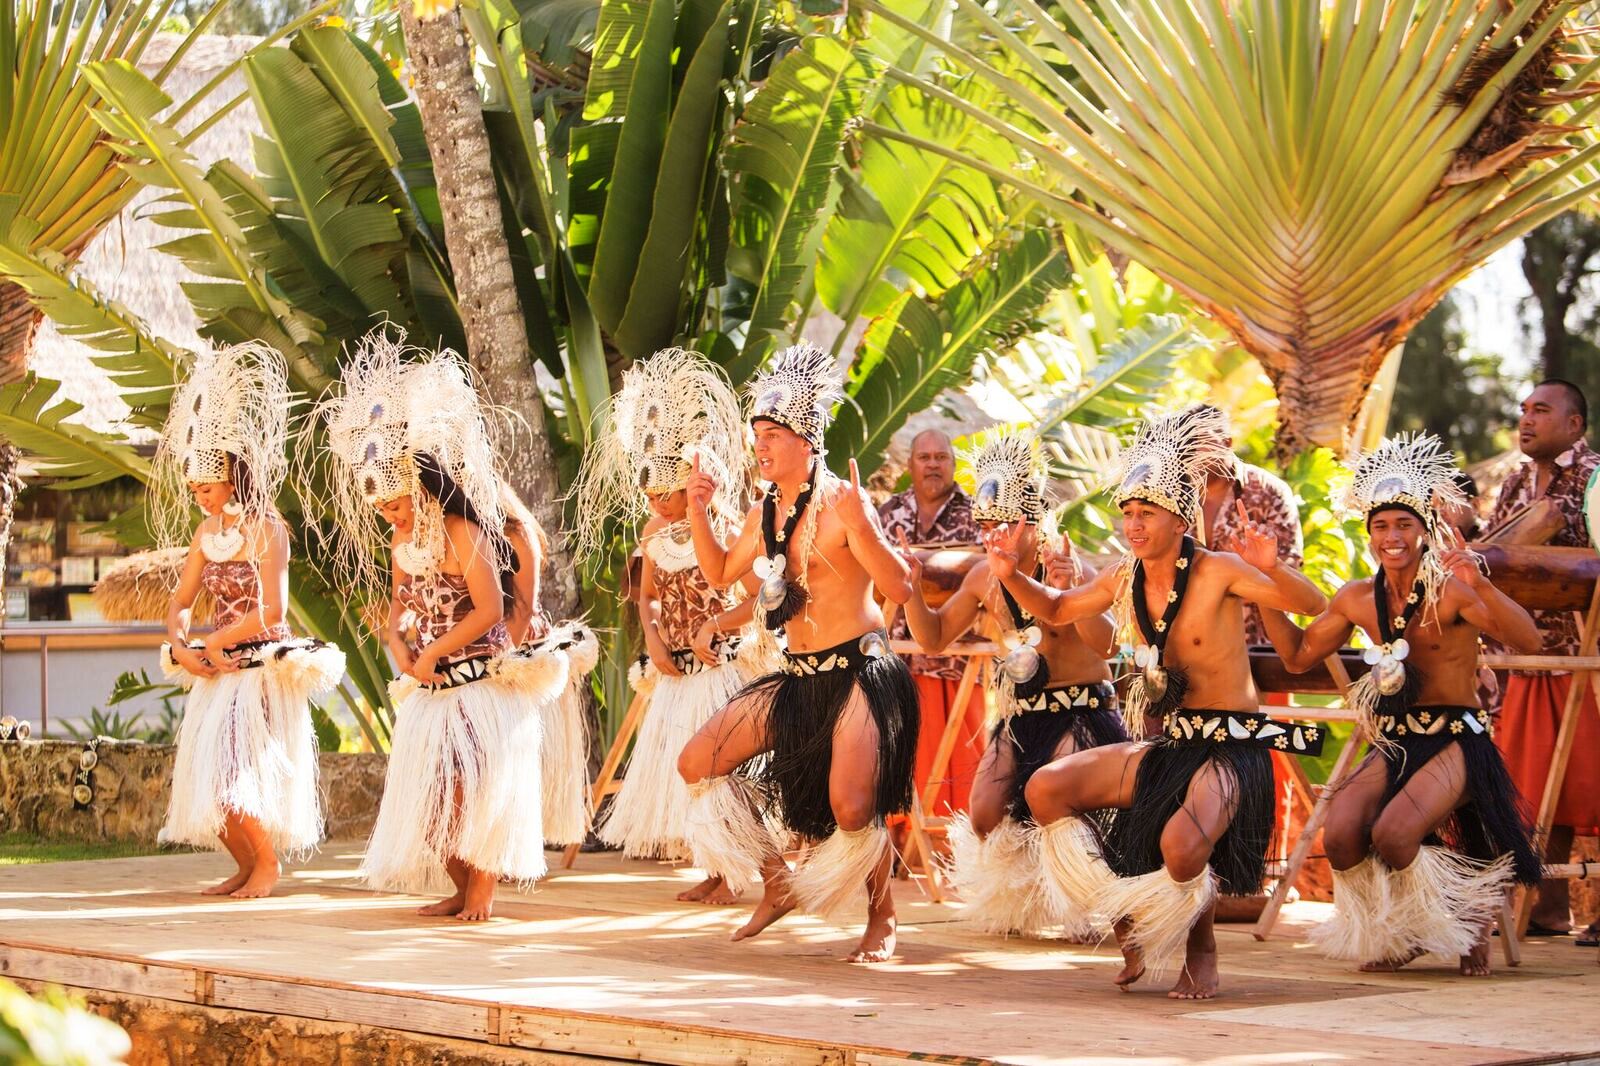 Picture of the male dancers performing at the Polynesian Cultural Center in 2017